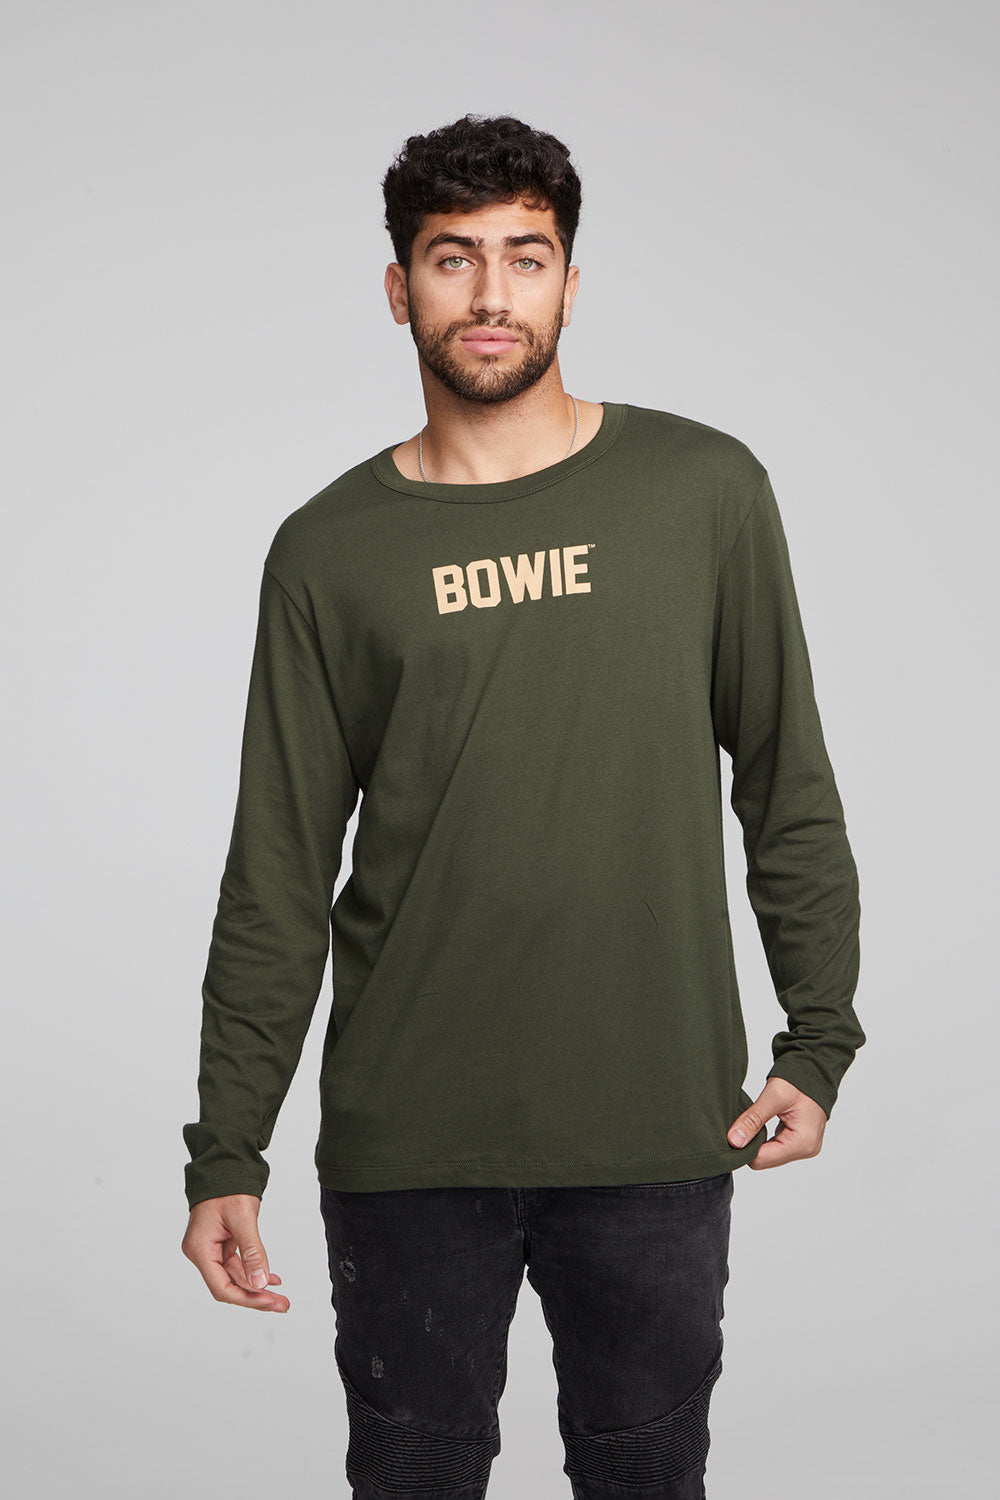 Men's Long Sleeve Bowie Graphic Tee